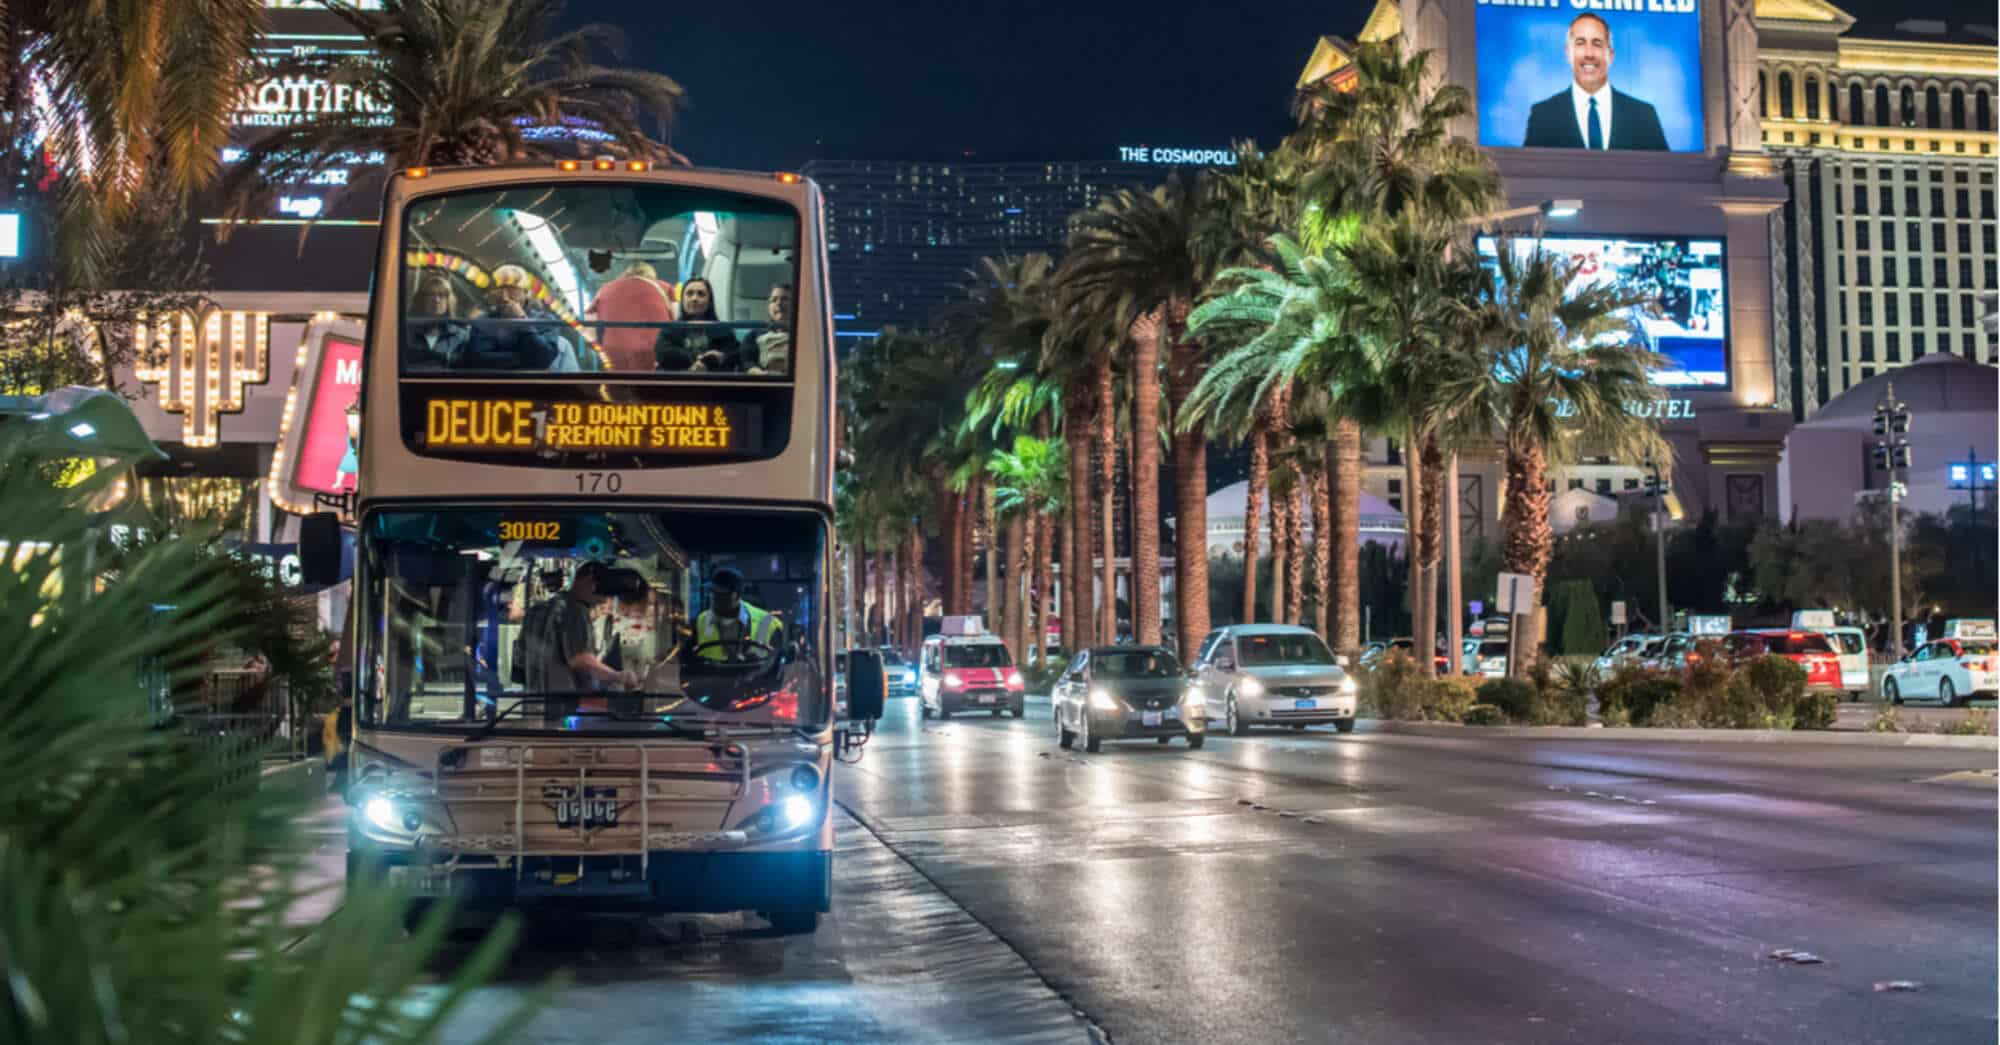 The Deuce, one of the buses on the Strip